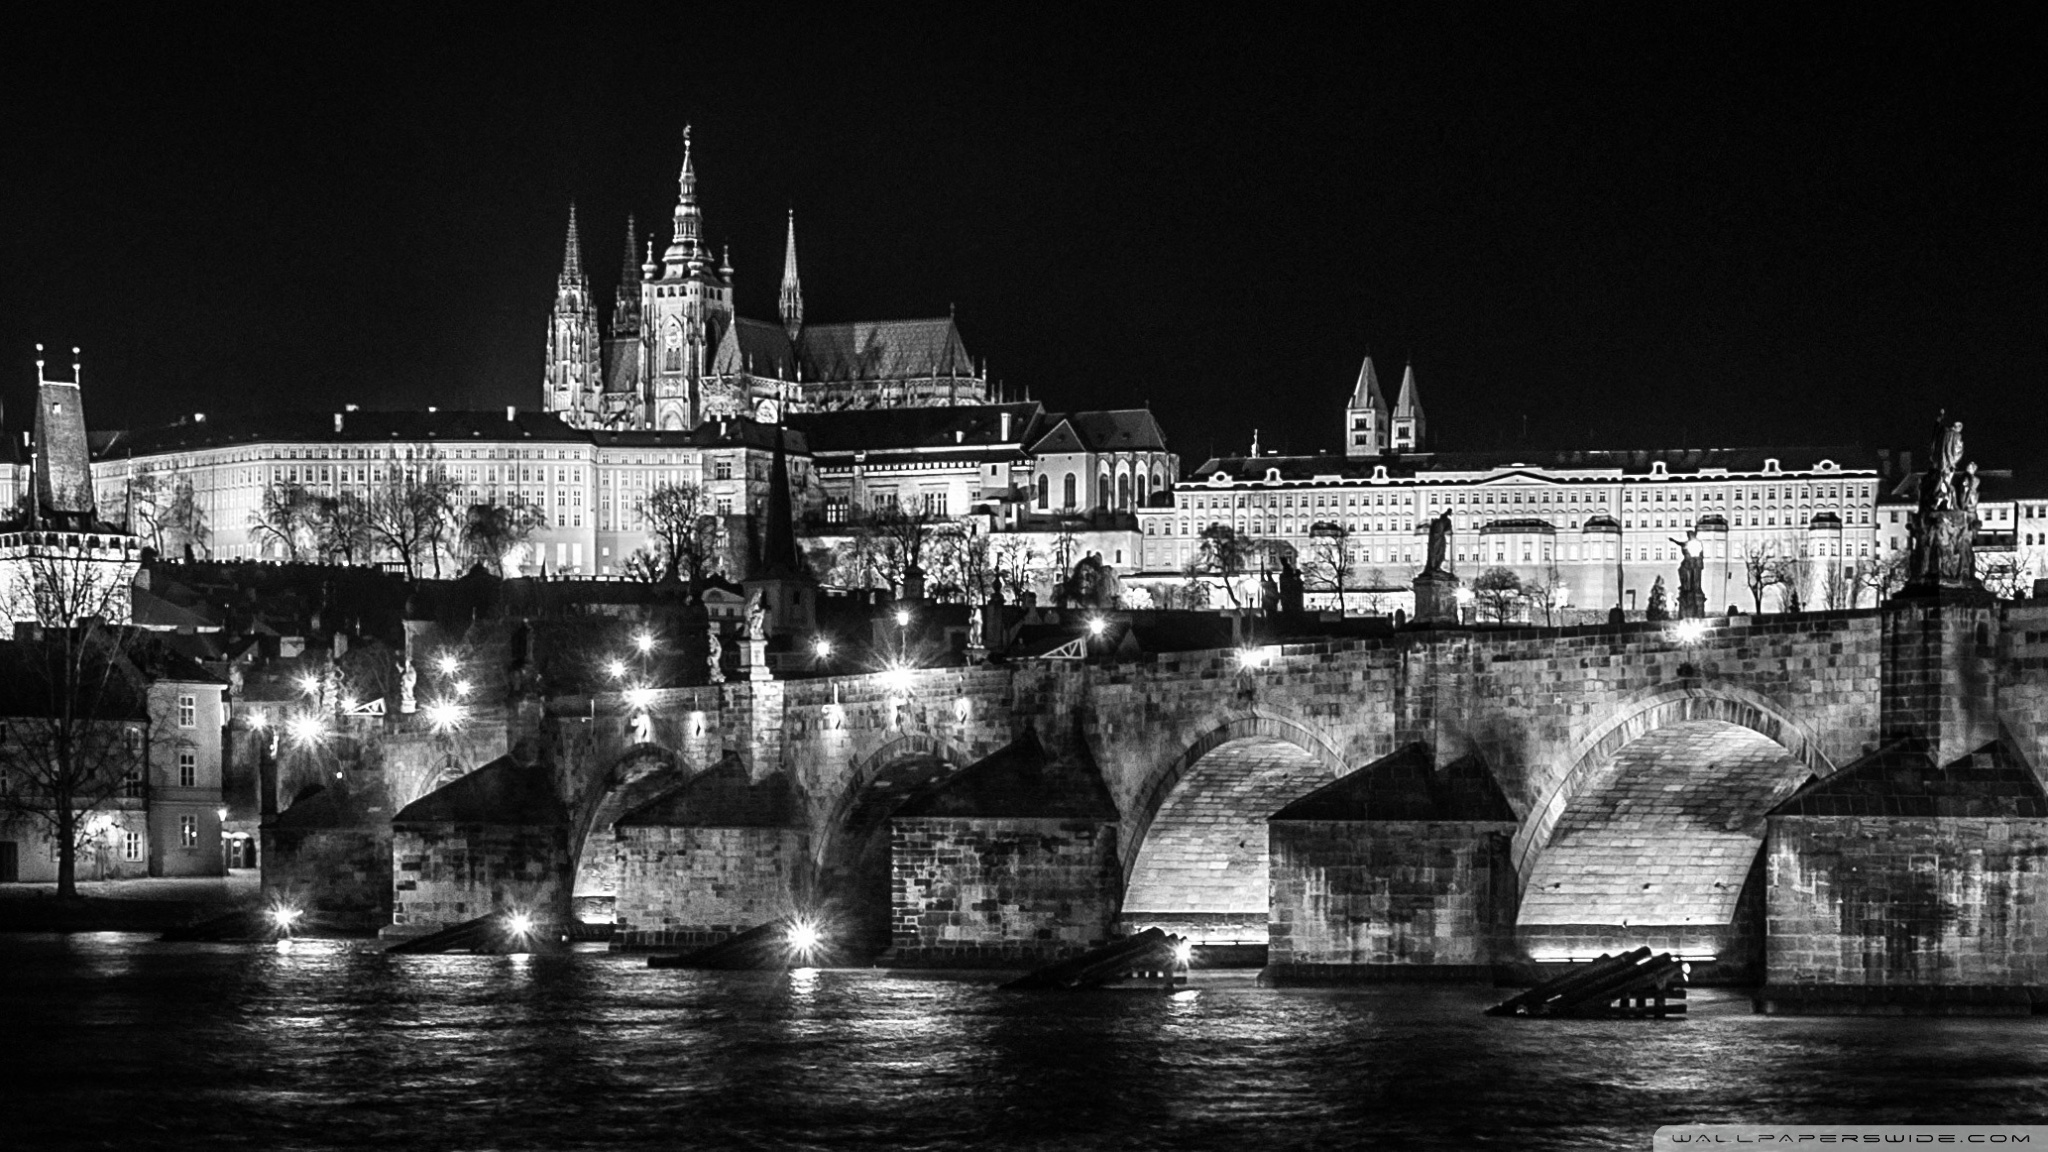 Prague Wallpapers HD APK for Android Download